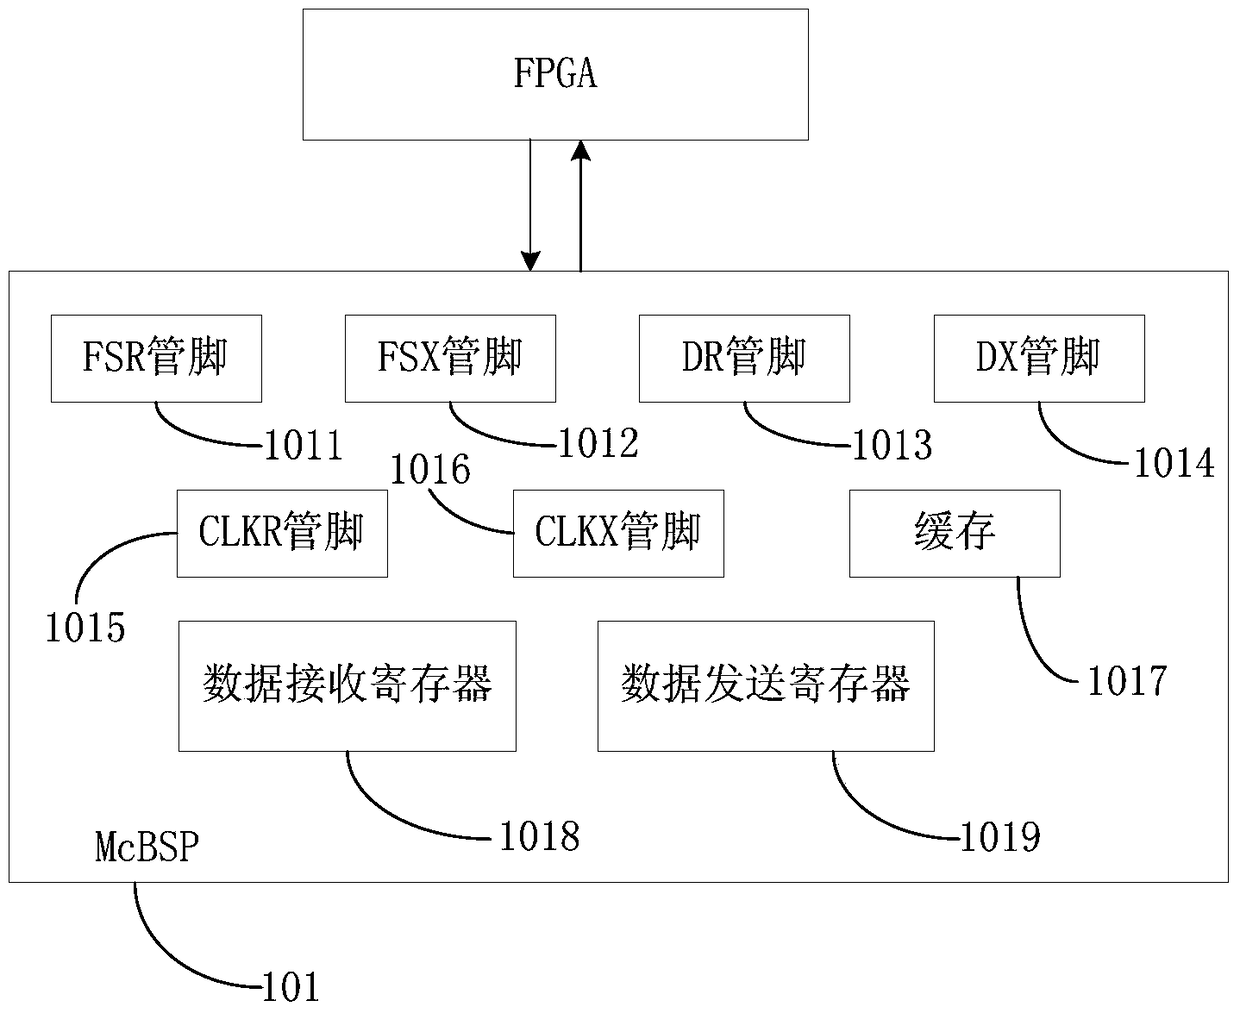 Real-time communication method and real-time communication system between dsp and fpga